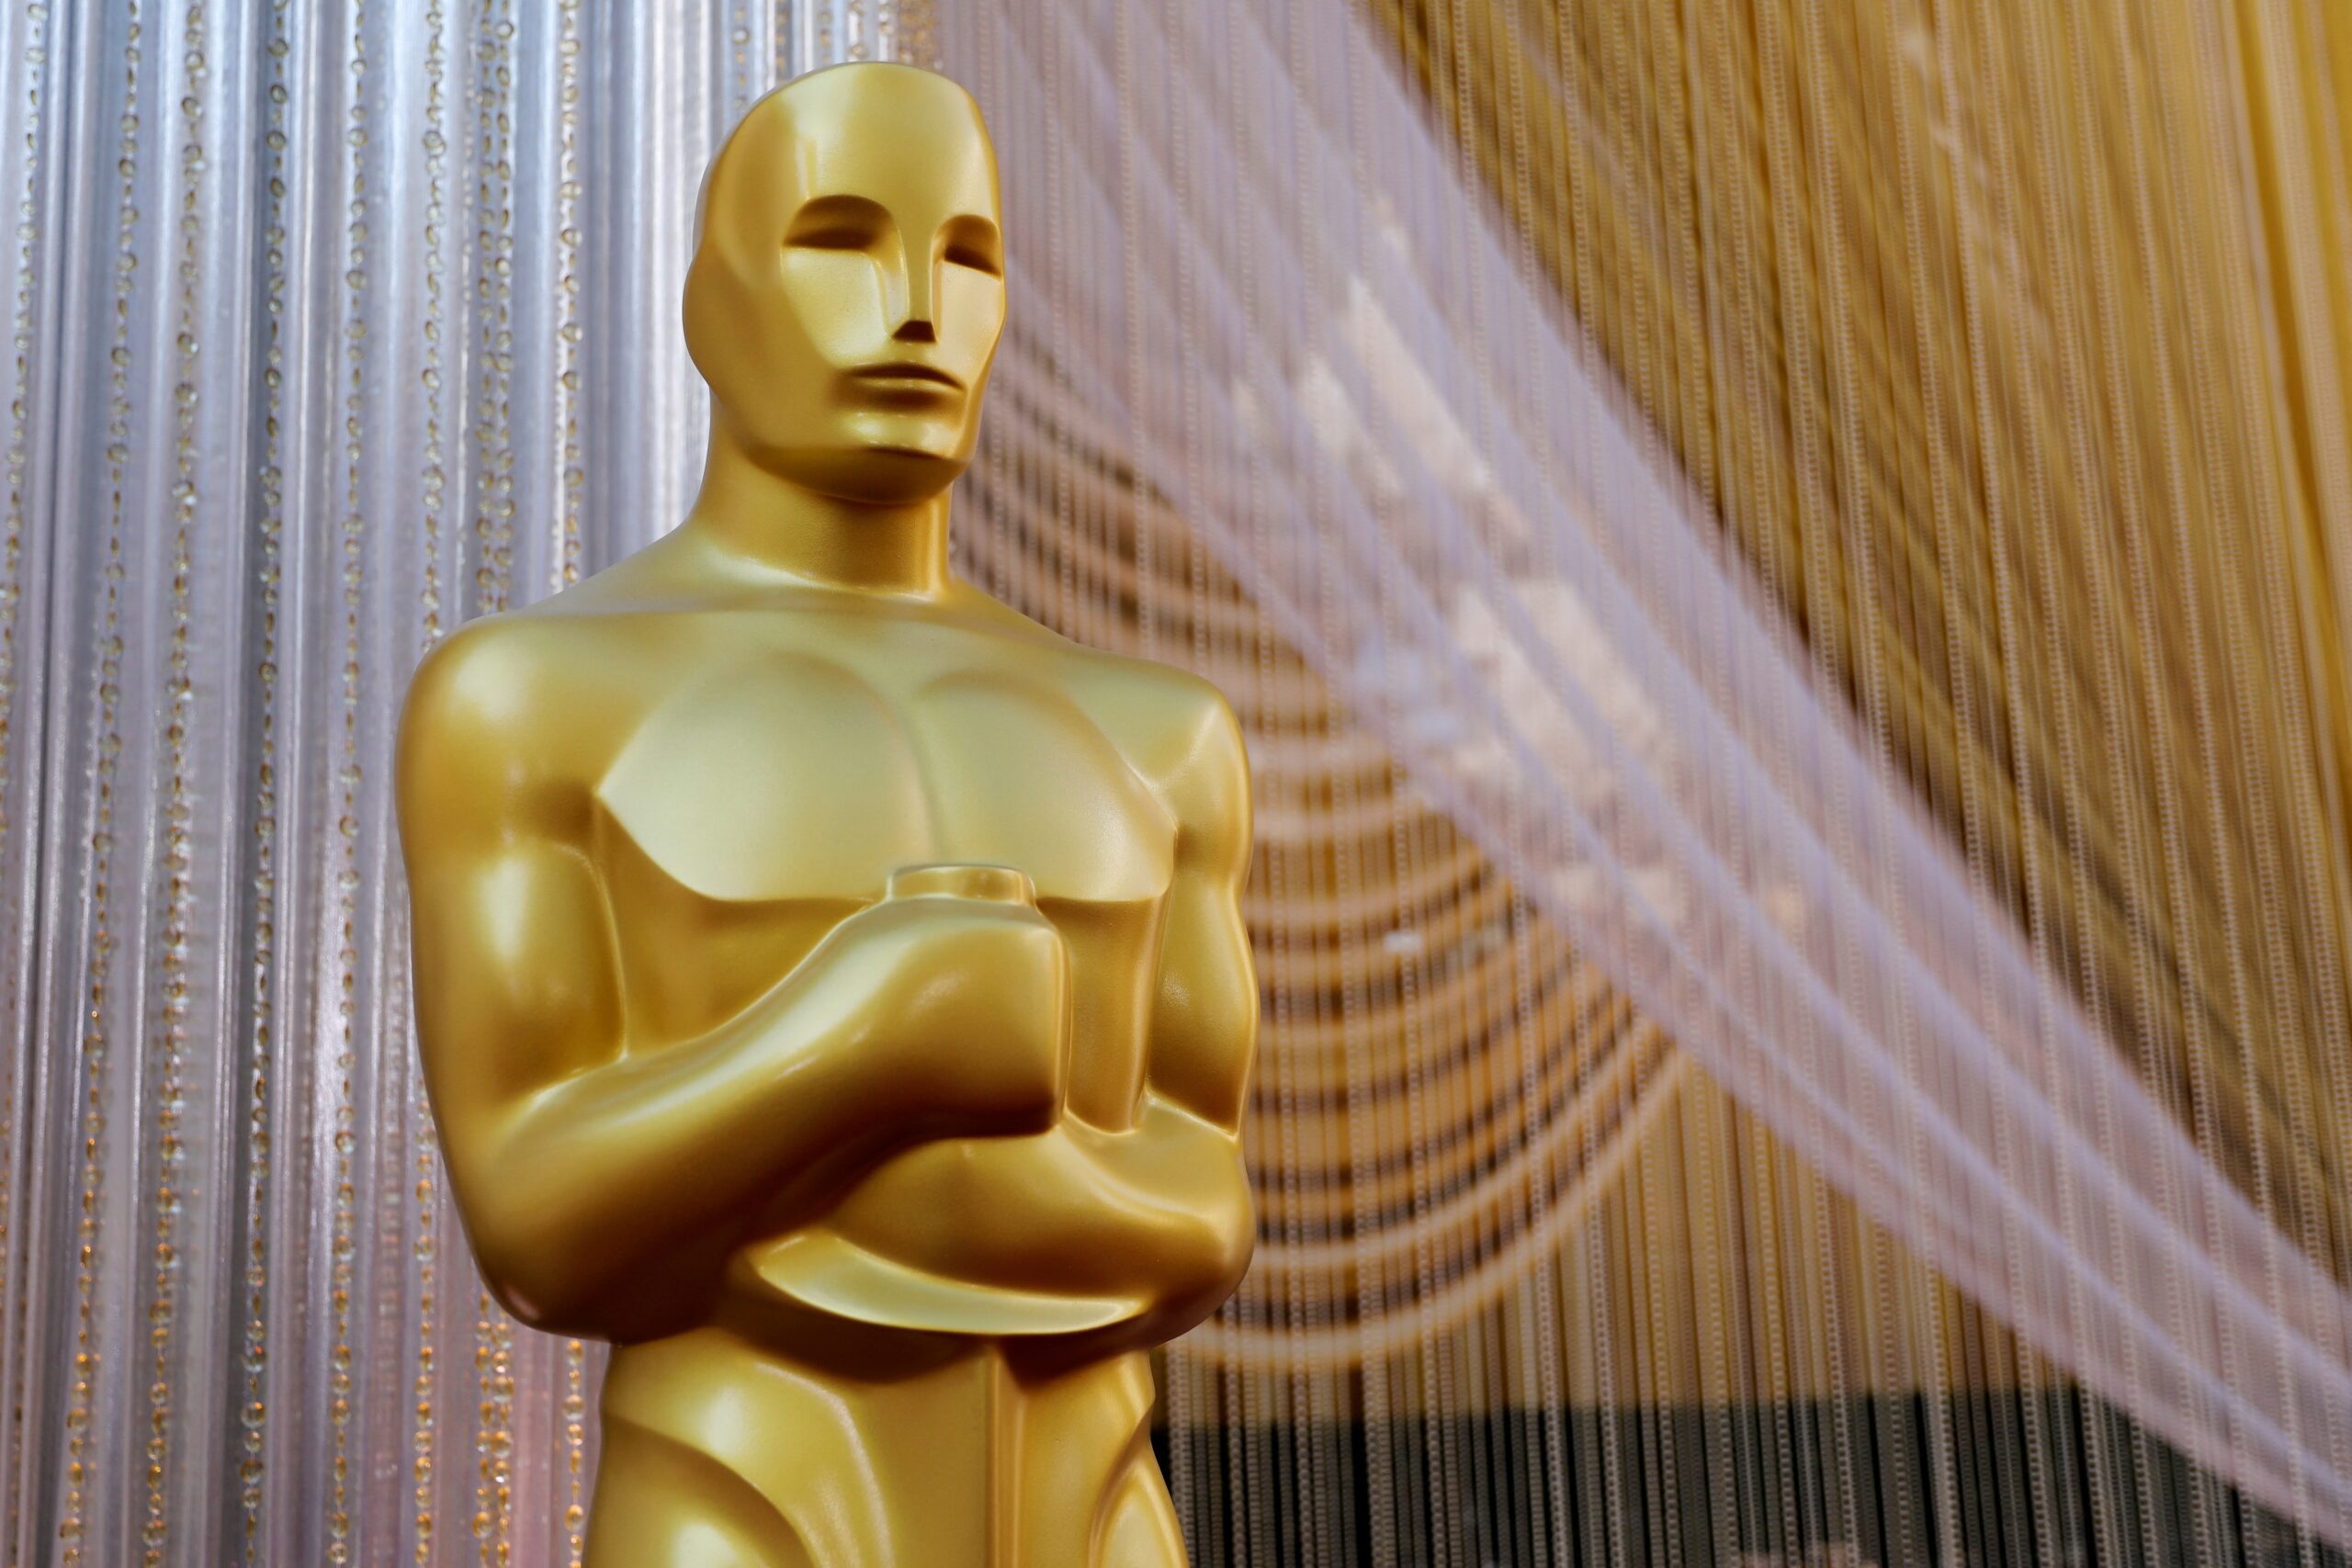 Oscars will require COVID-19 tests for all guests and vaccines for most